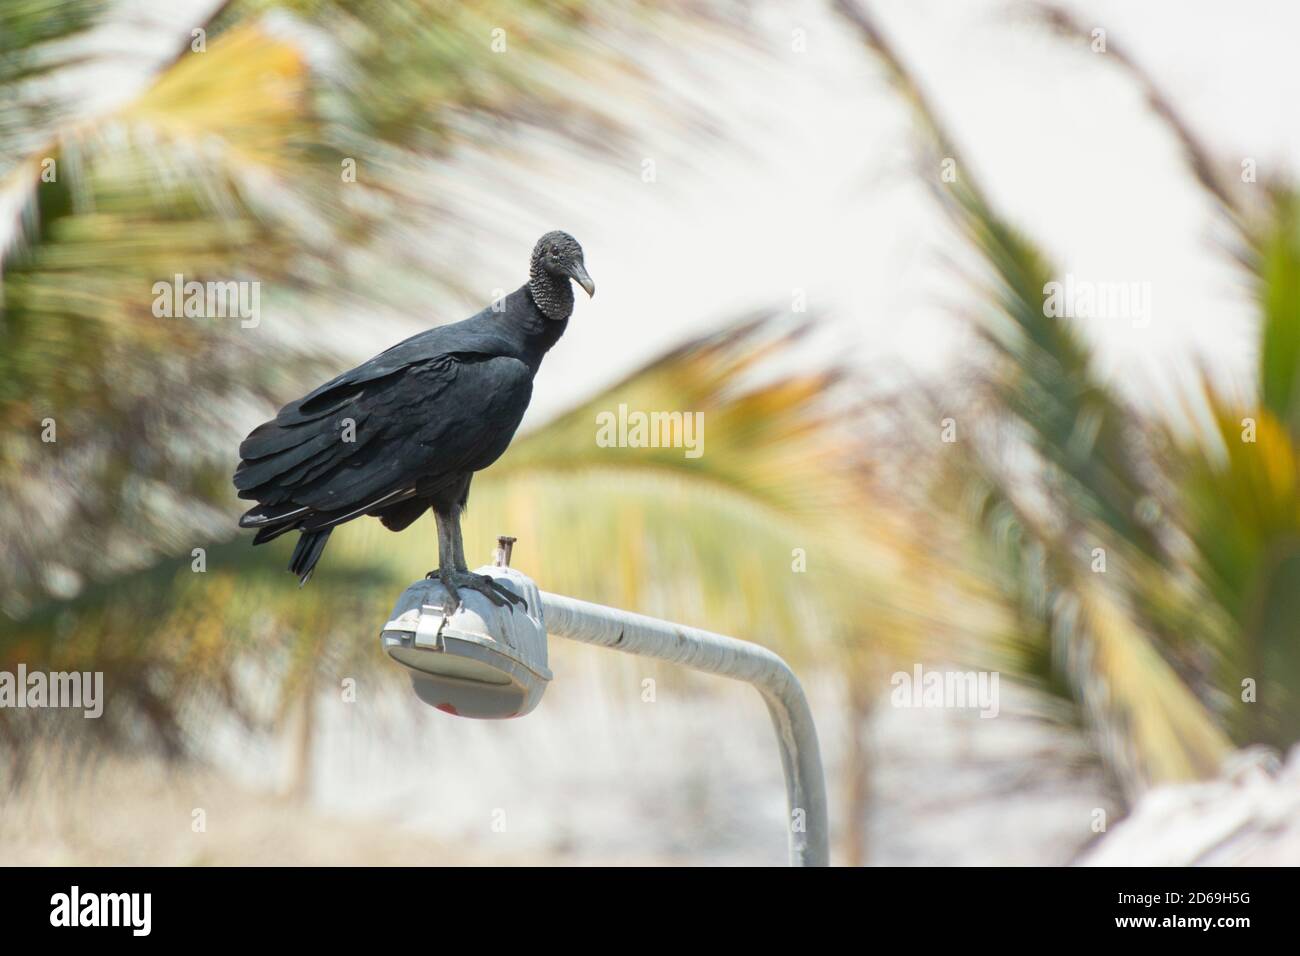 American Black Vulture (Coragyps atratus) is found commonly in many area of Peru and here on the coast of northern Peru Stock Photo